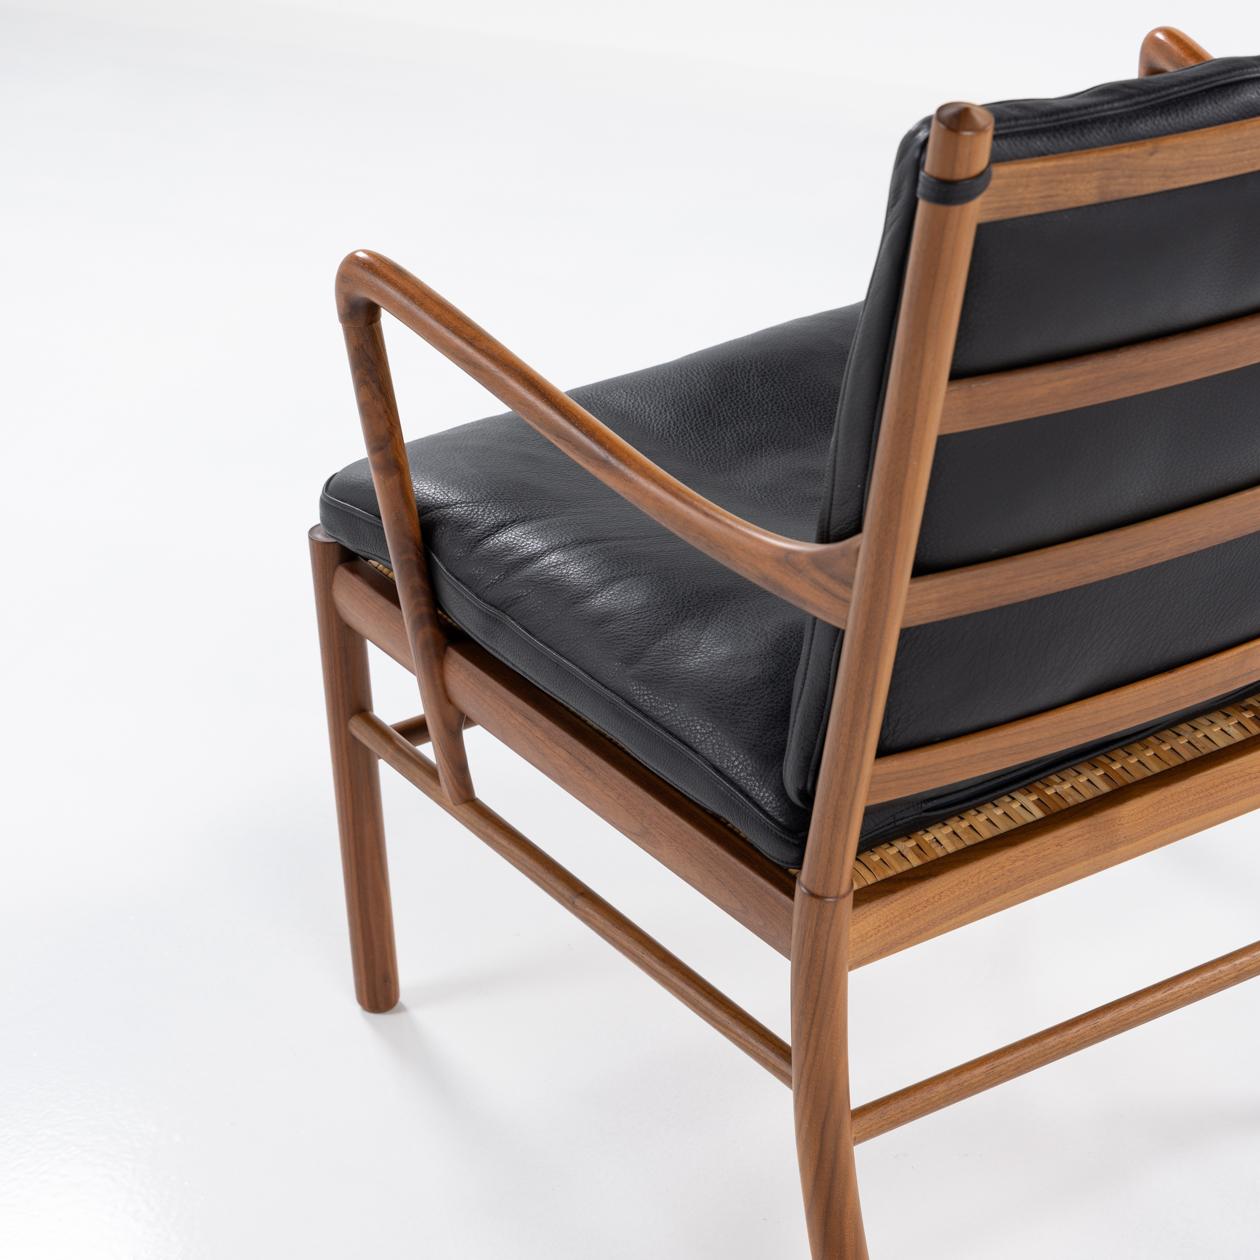 Scandinavian Modern PJ 149 - 'Colonial chair' in black leather and walnut by Ole Wanscher For Sale